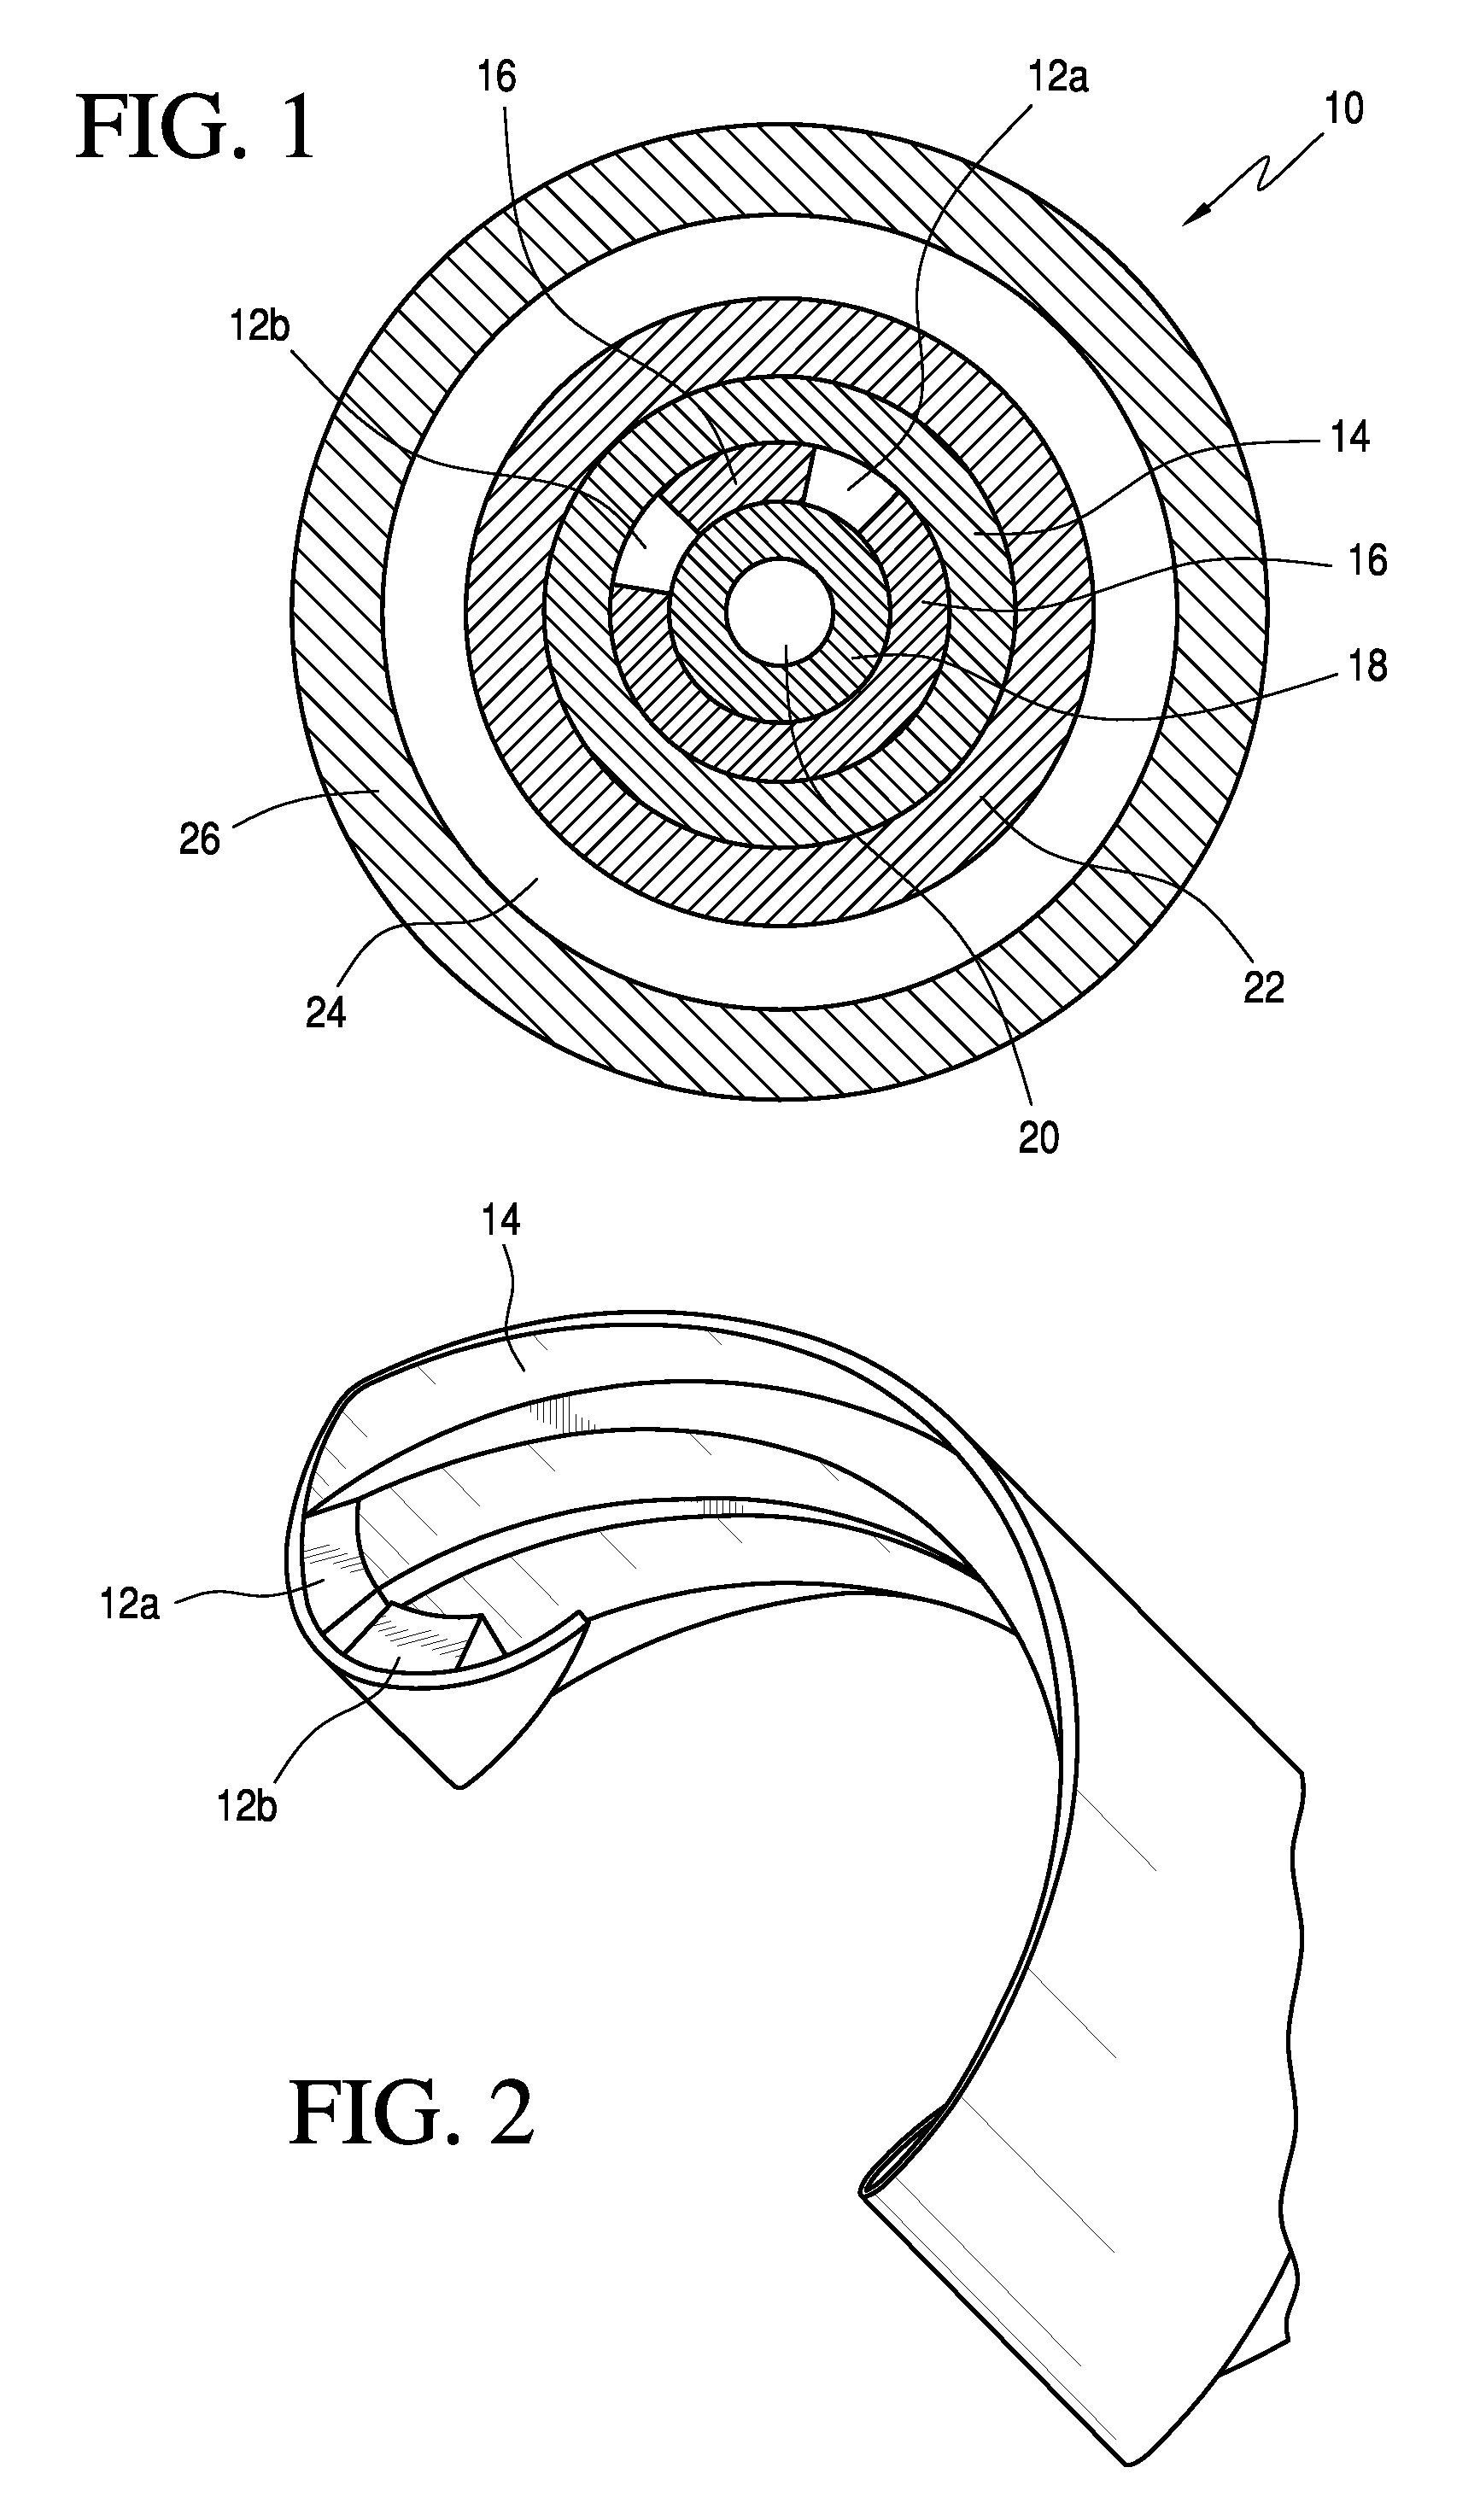 Spirally Wound Electrical Cable for Enhanced Magnetic Field Cancellation and Controlled Impedance